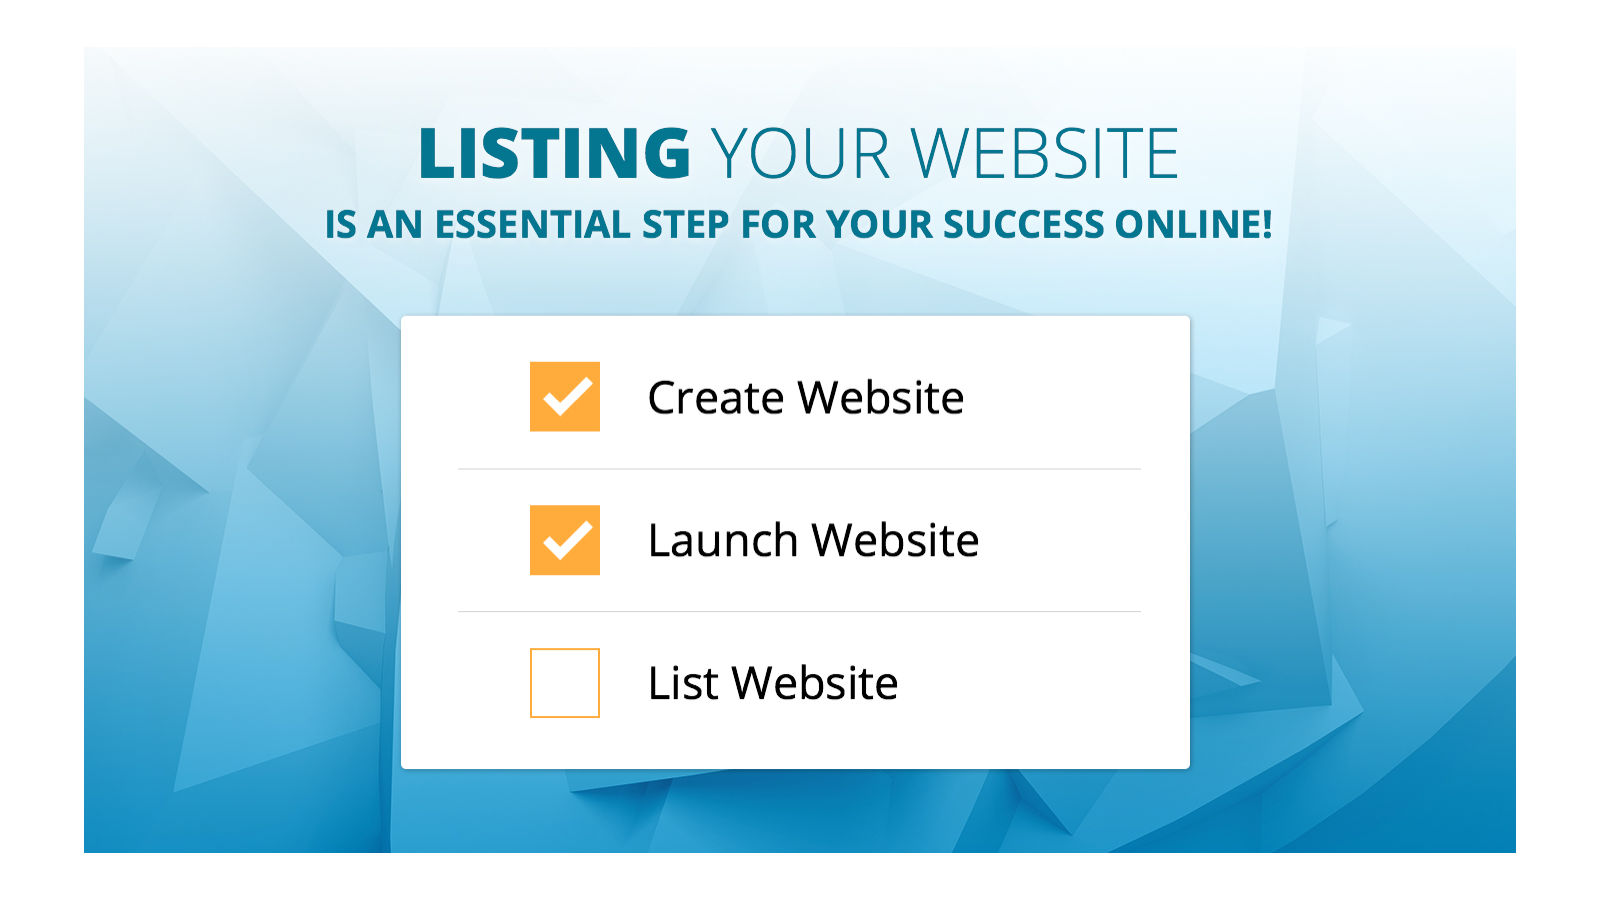 Listing your site is an essential step for your success online